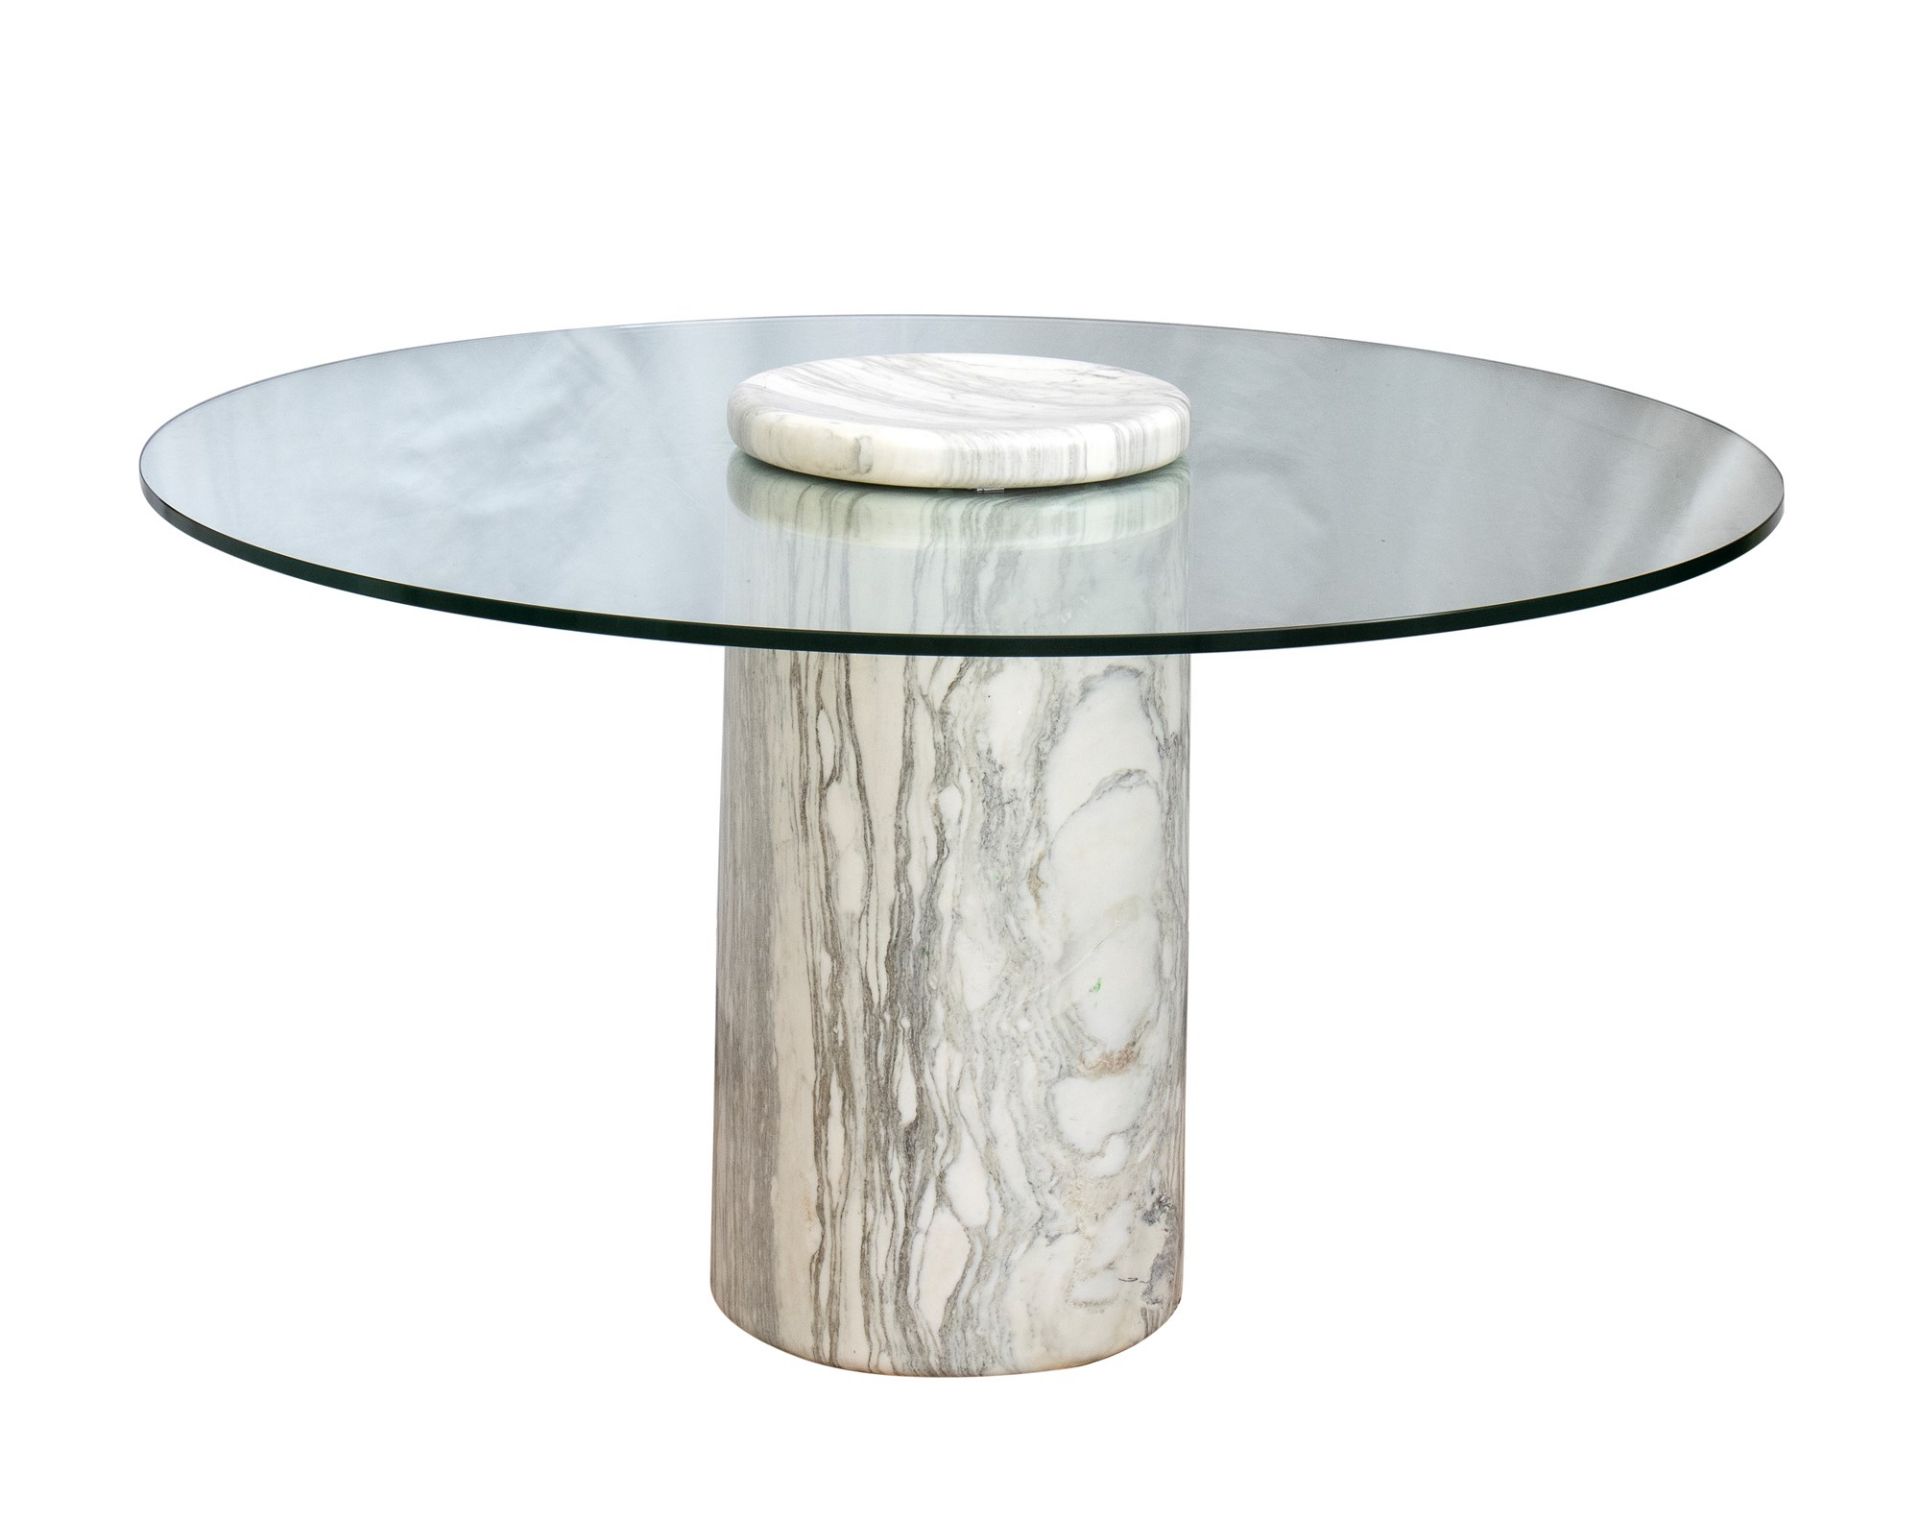 Angelo Mangiarotti Castore table in white marble and glass top